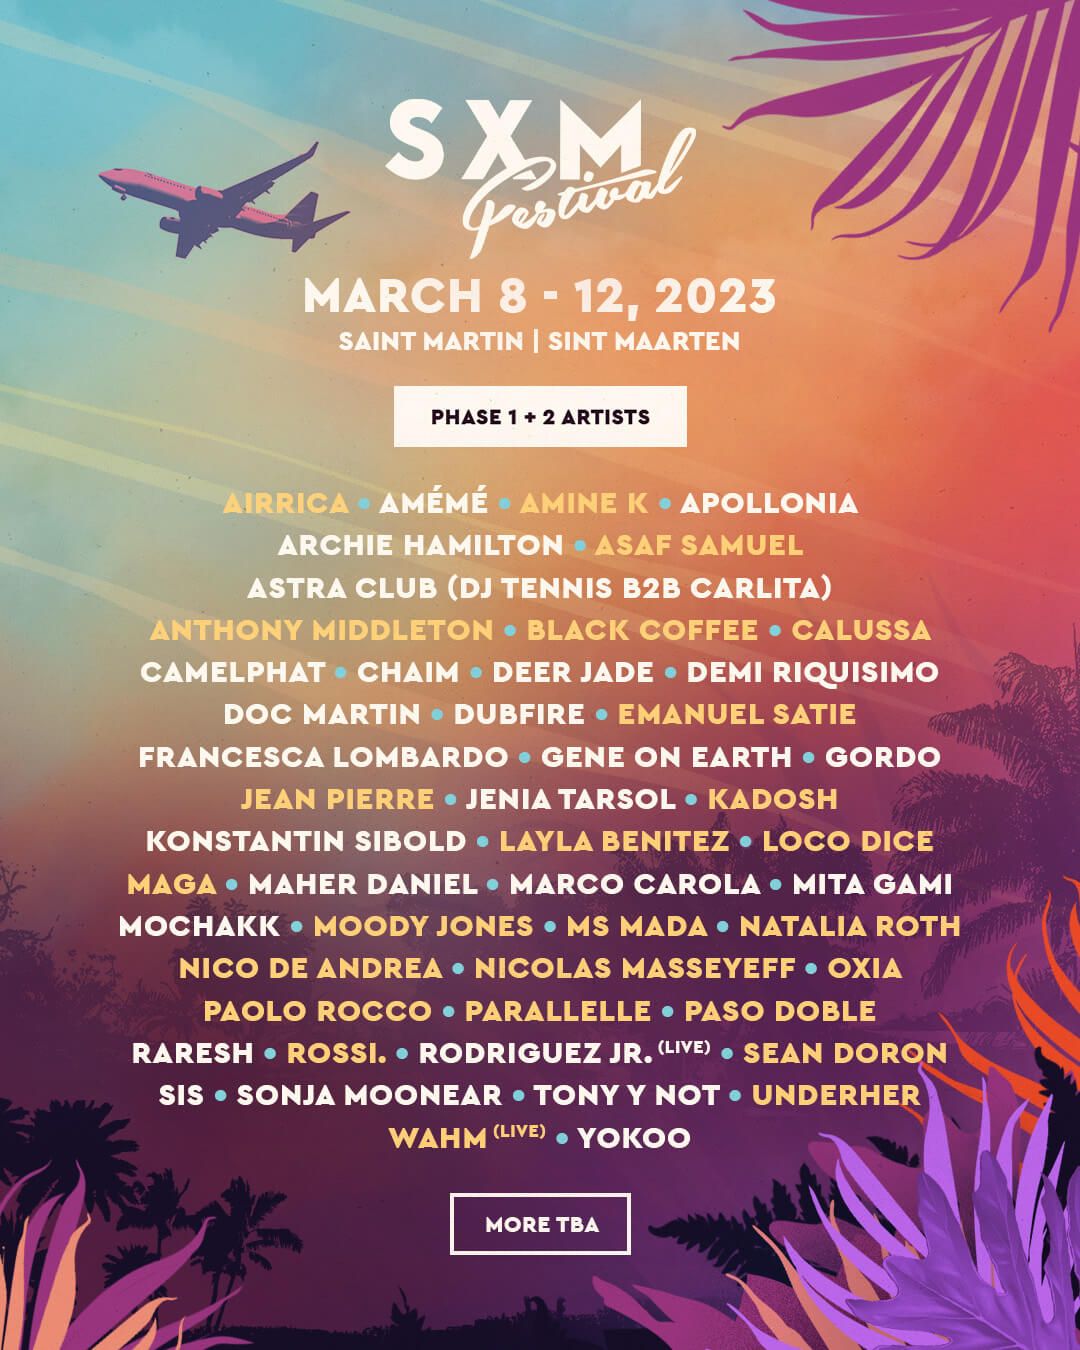 Mita Gami selects 10 tracks to get into the SXM Festival mood ...